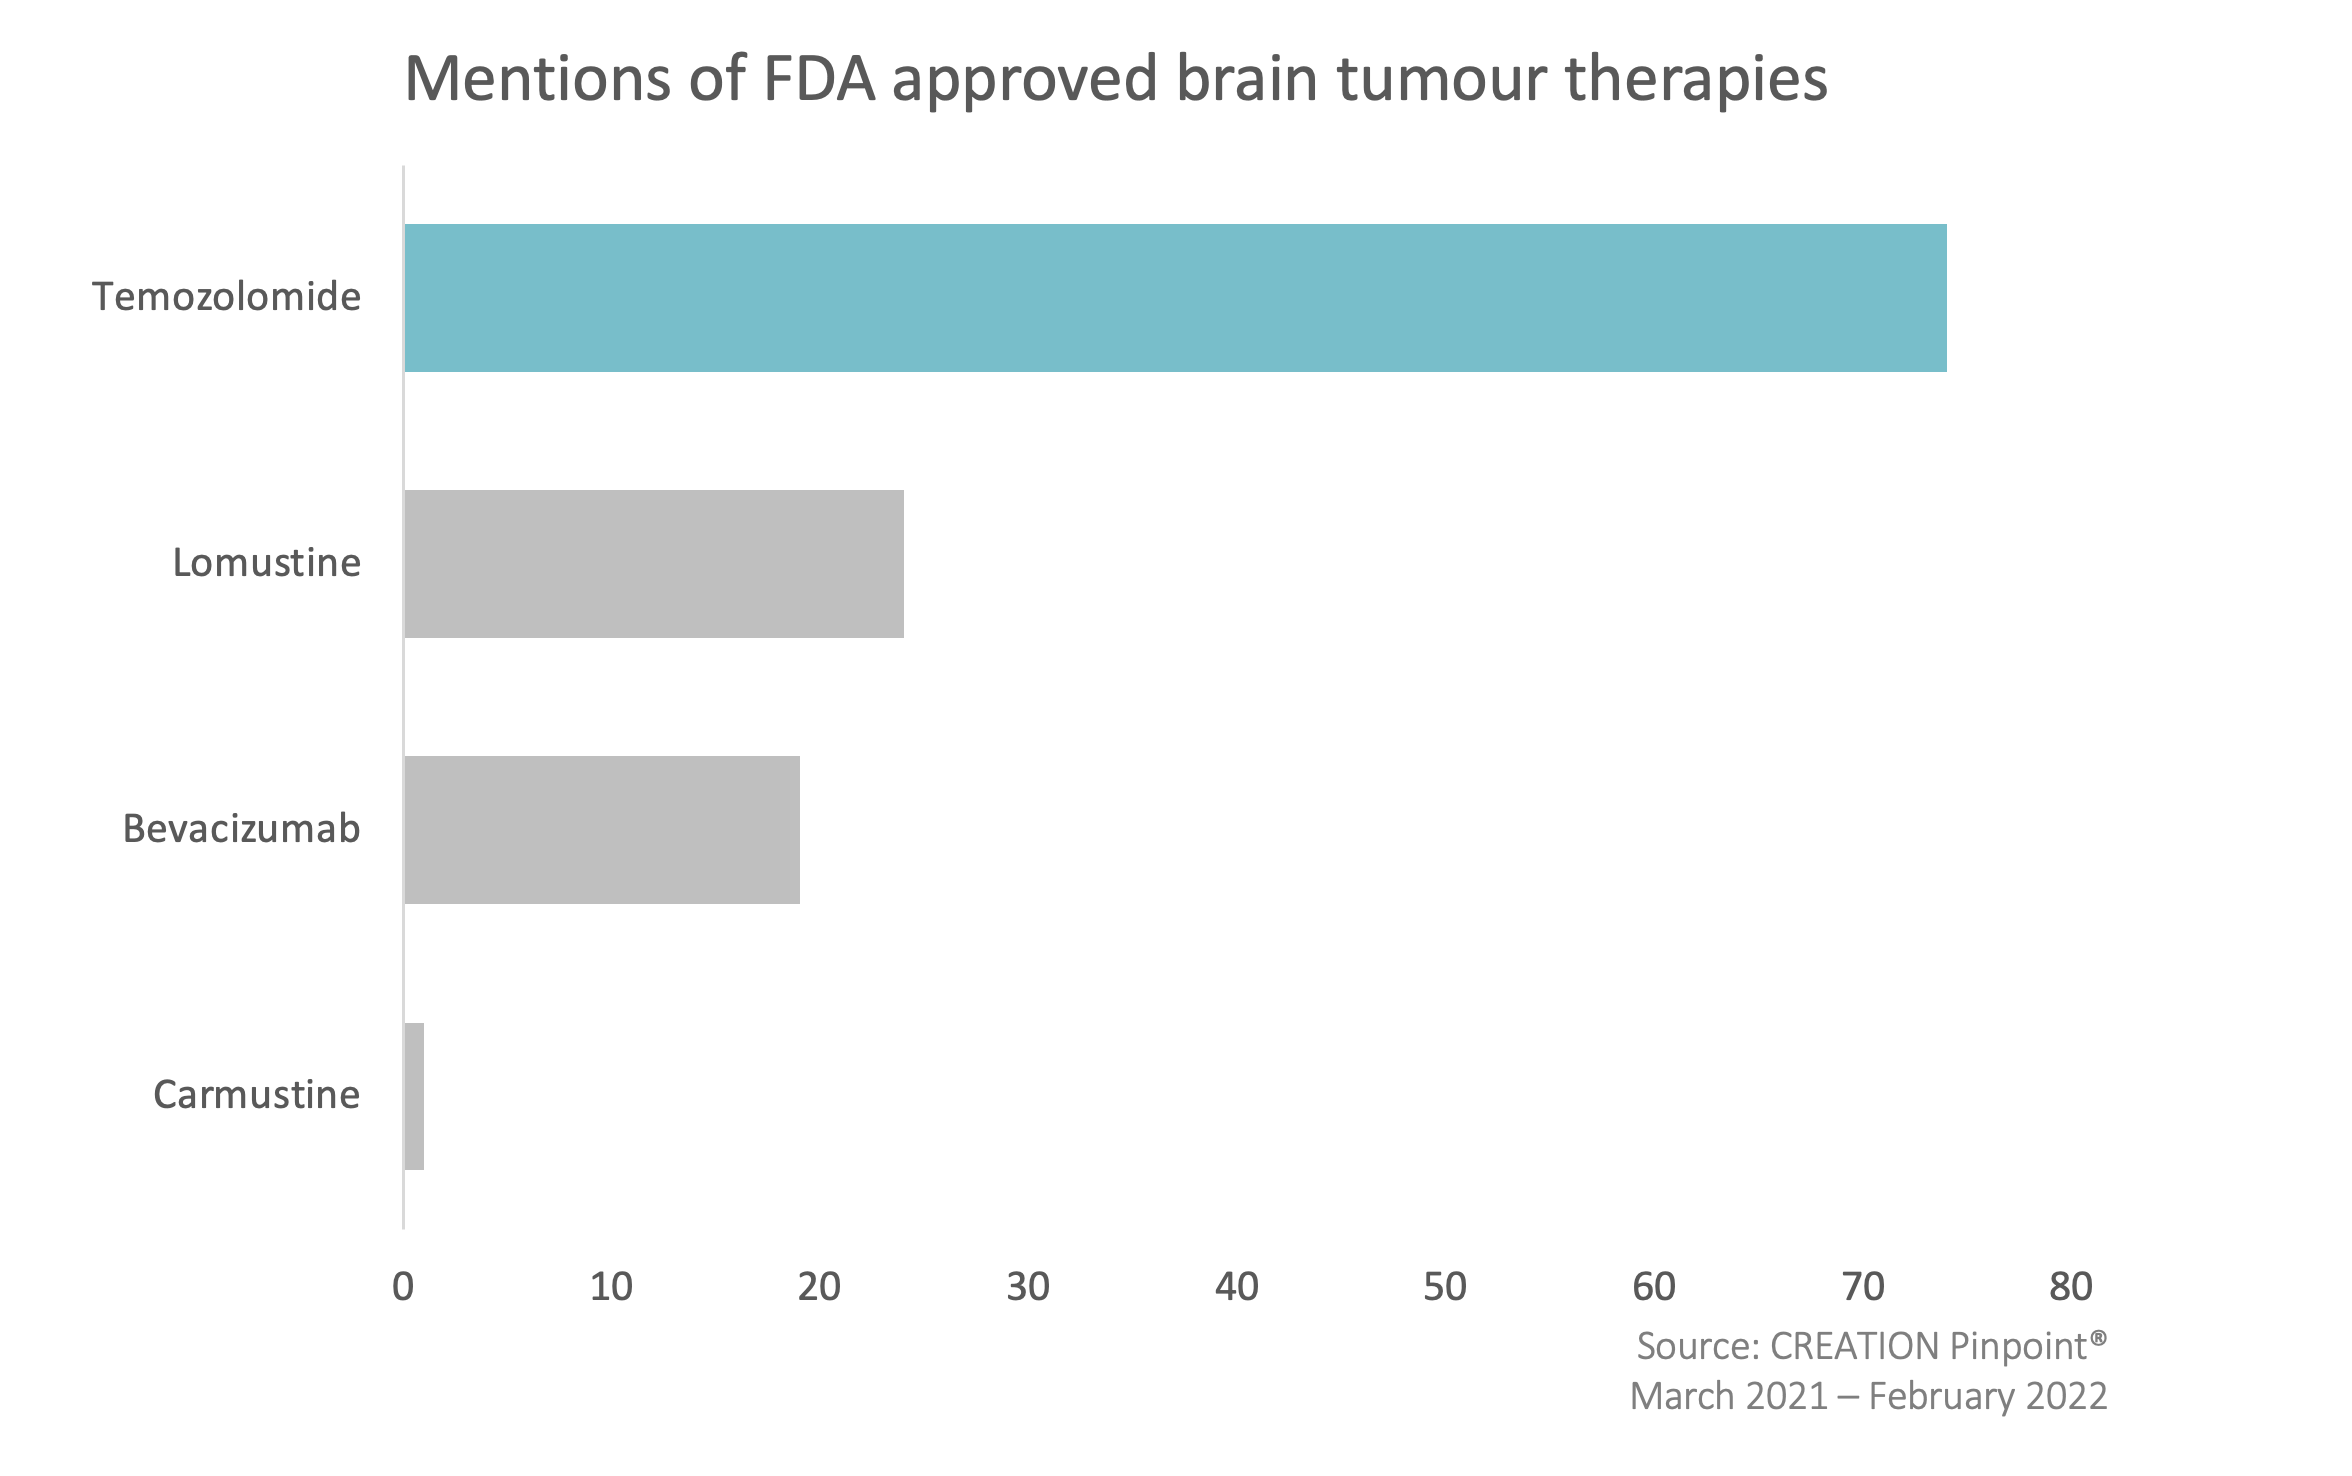 Graph showing FDA approved brain tumour therapies